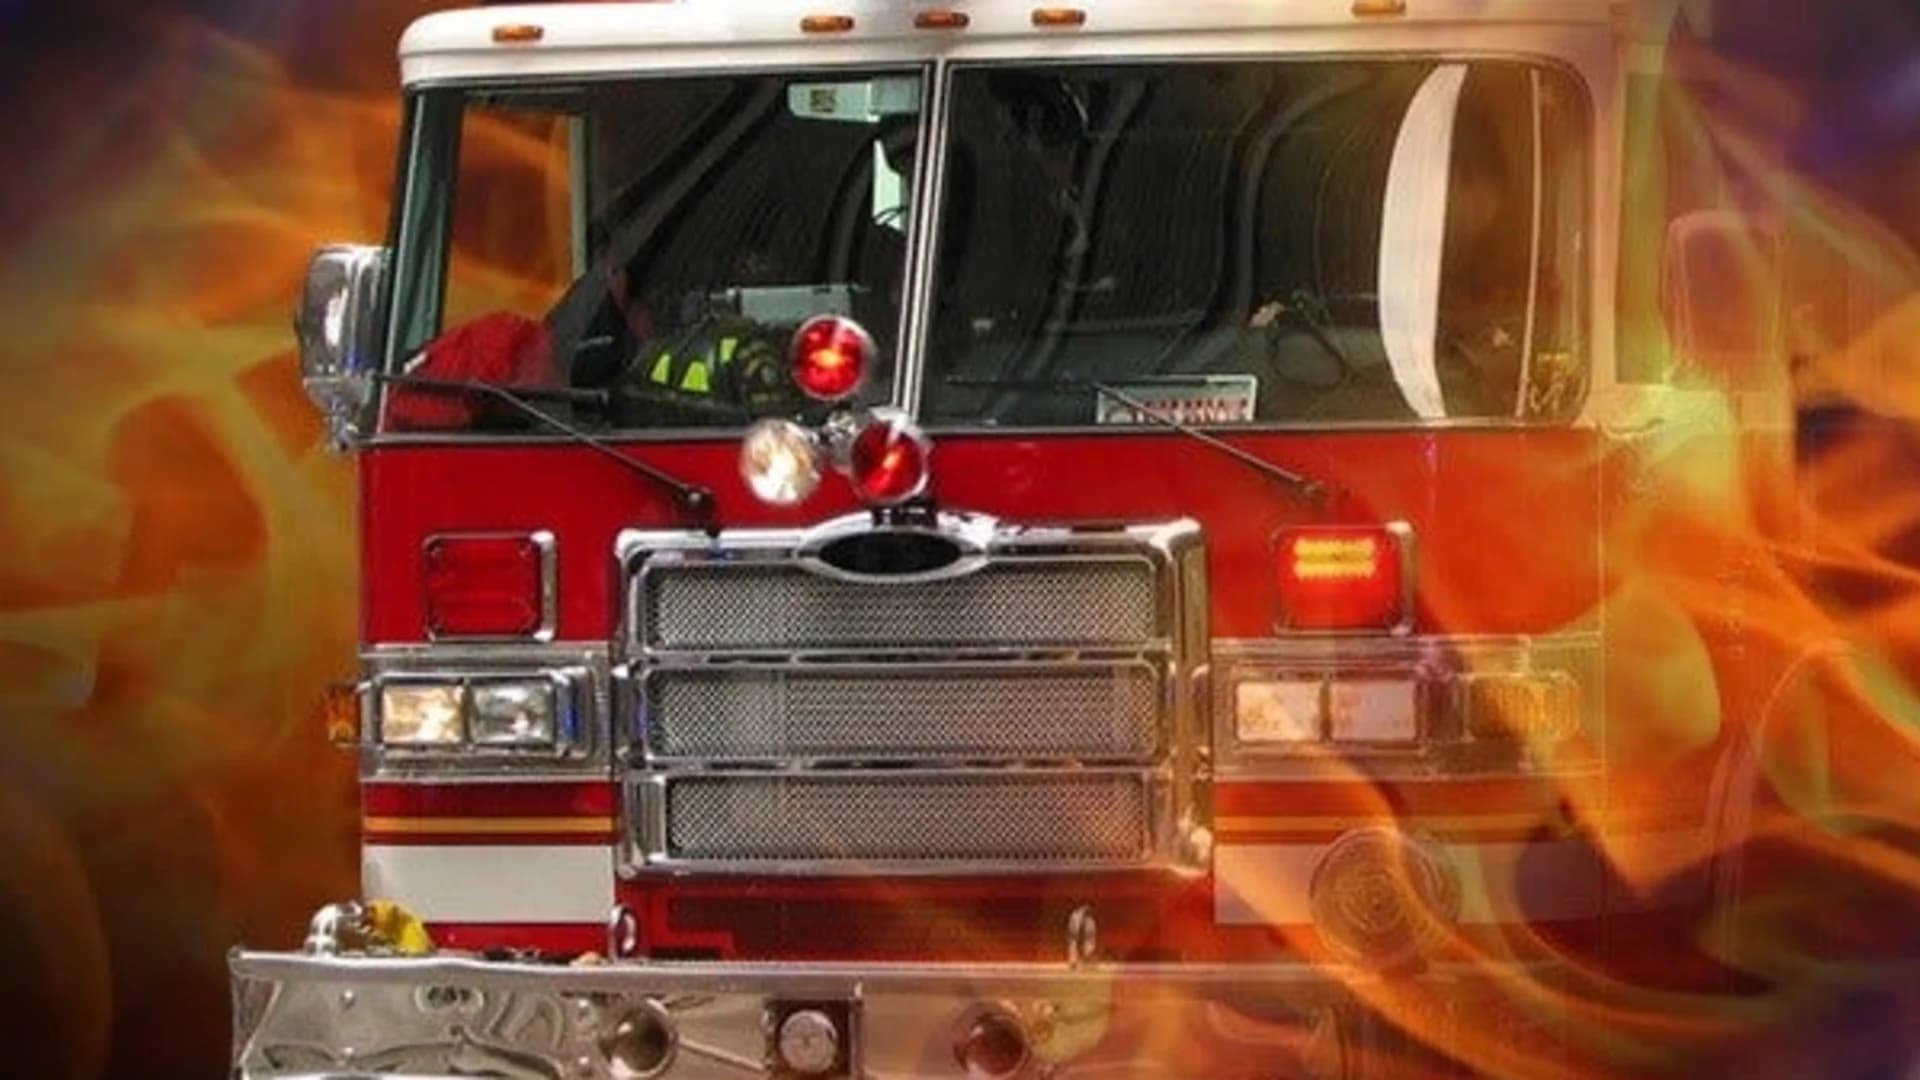 Authorities: New Jersey mall partially evacuated after fire in Hollister store